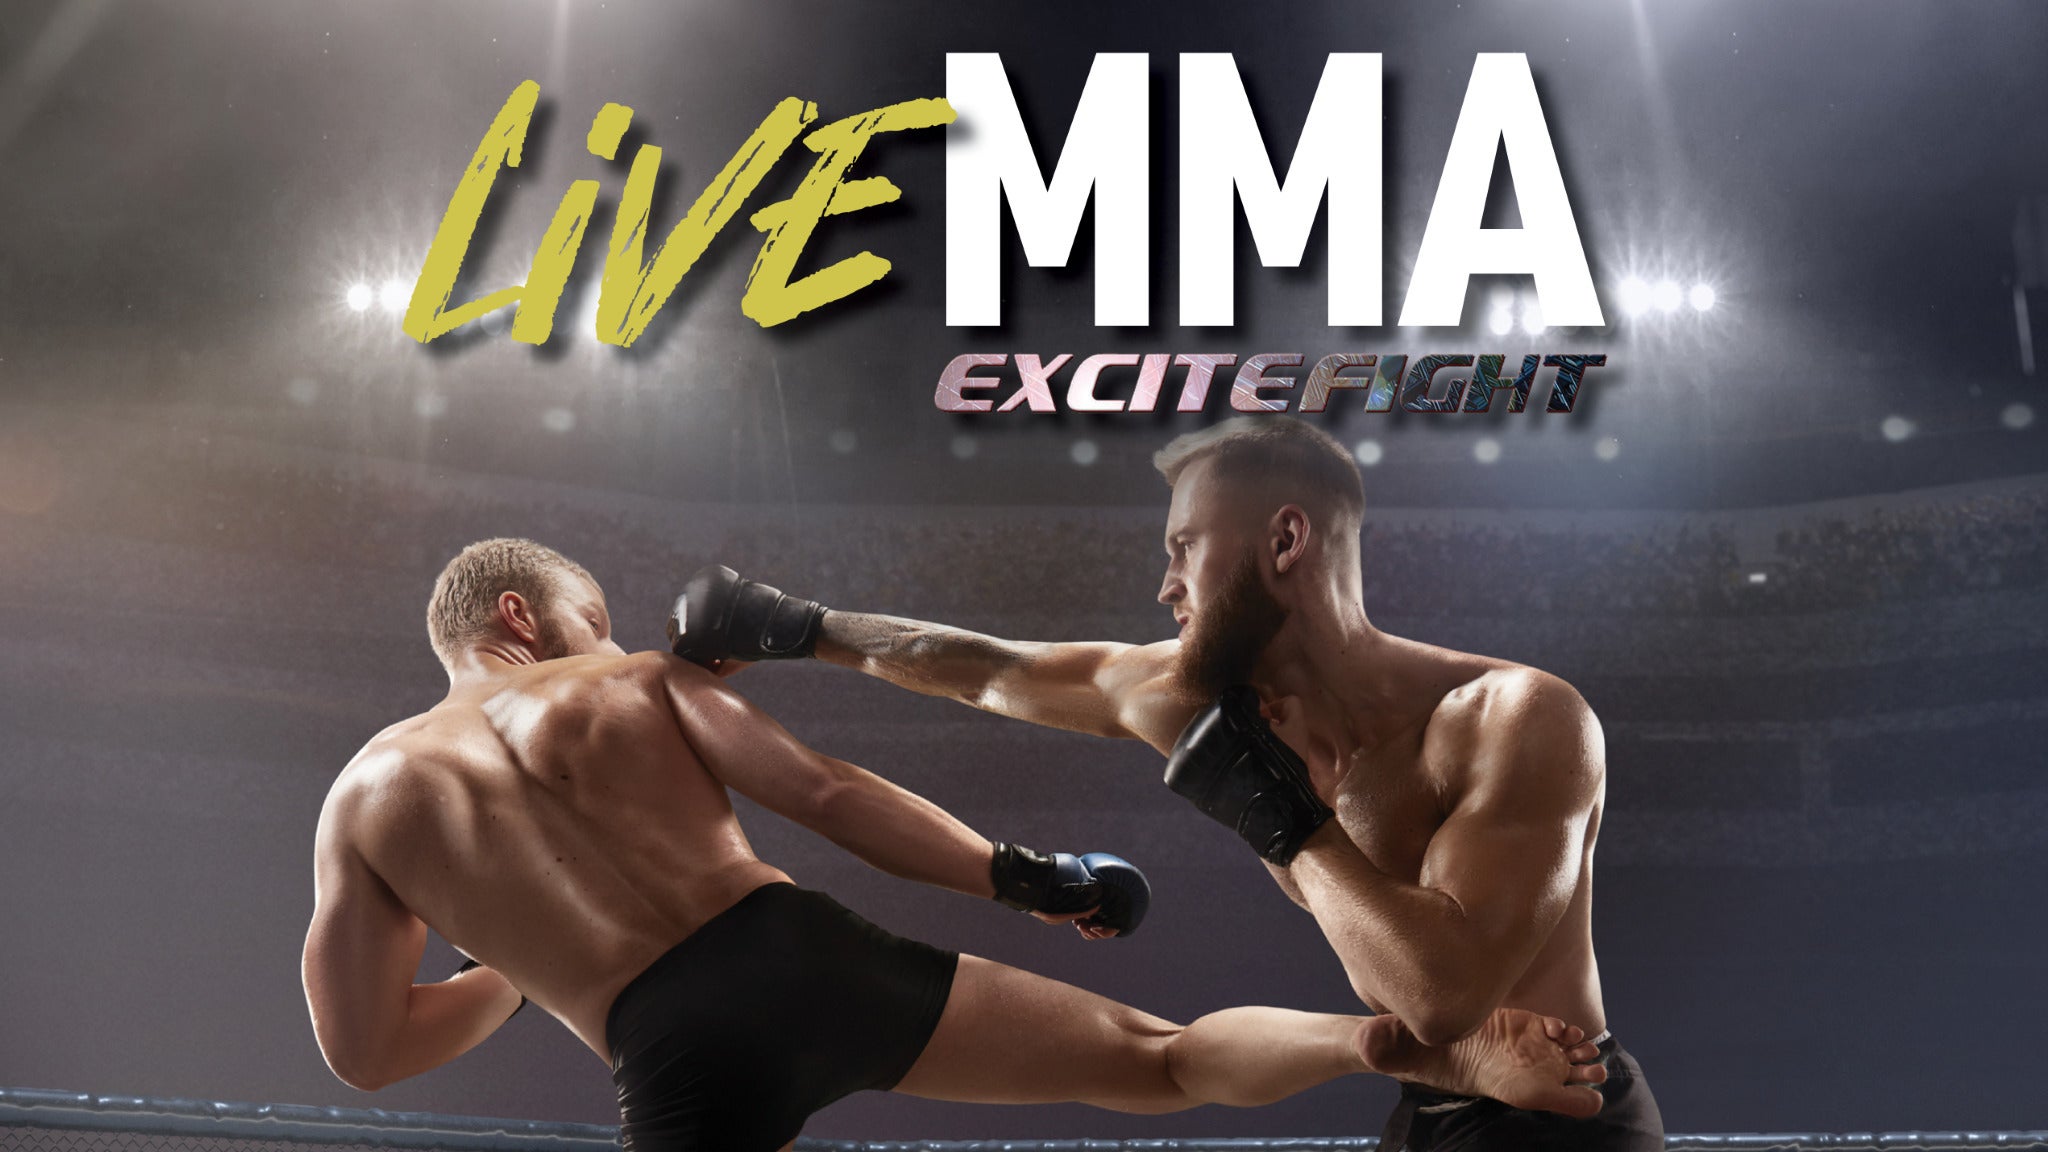 Excitefight MMA at Muckleshoot Casino Events Center